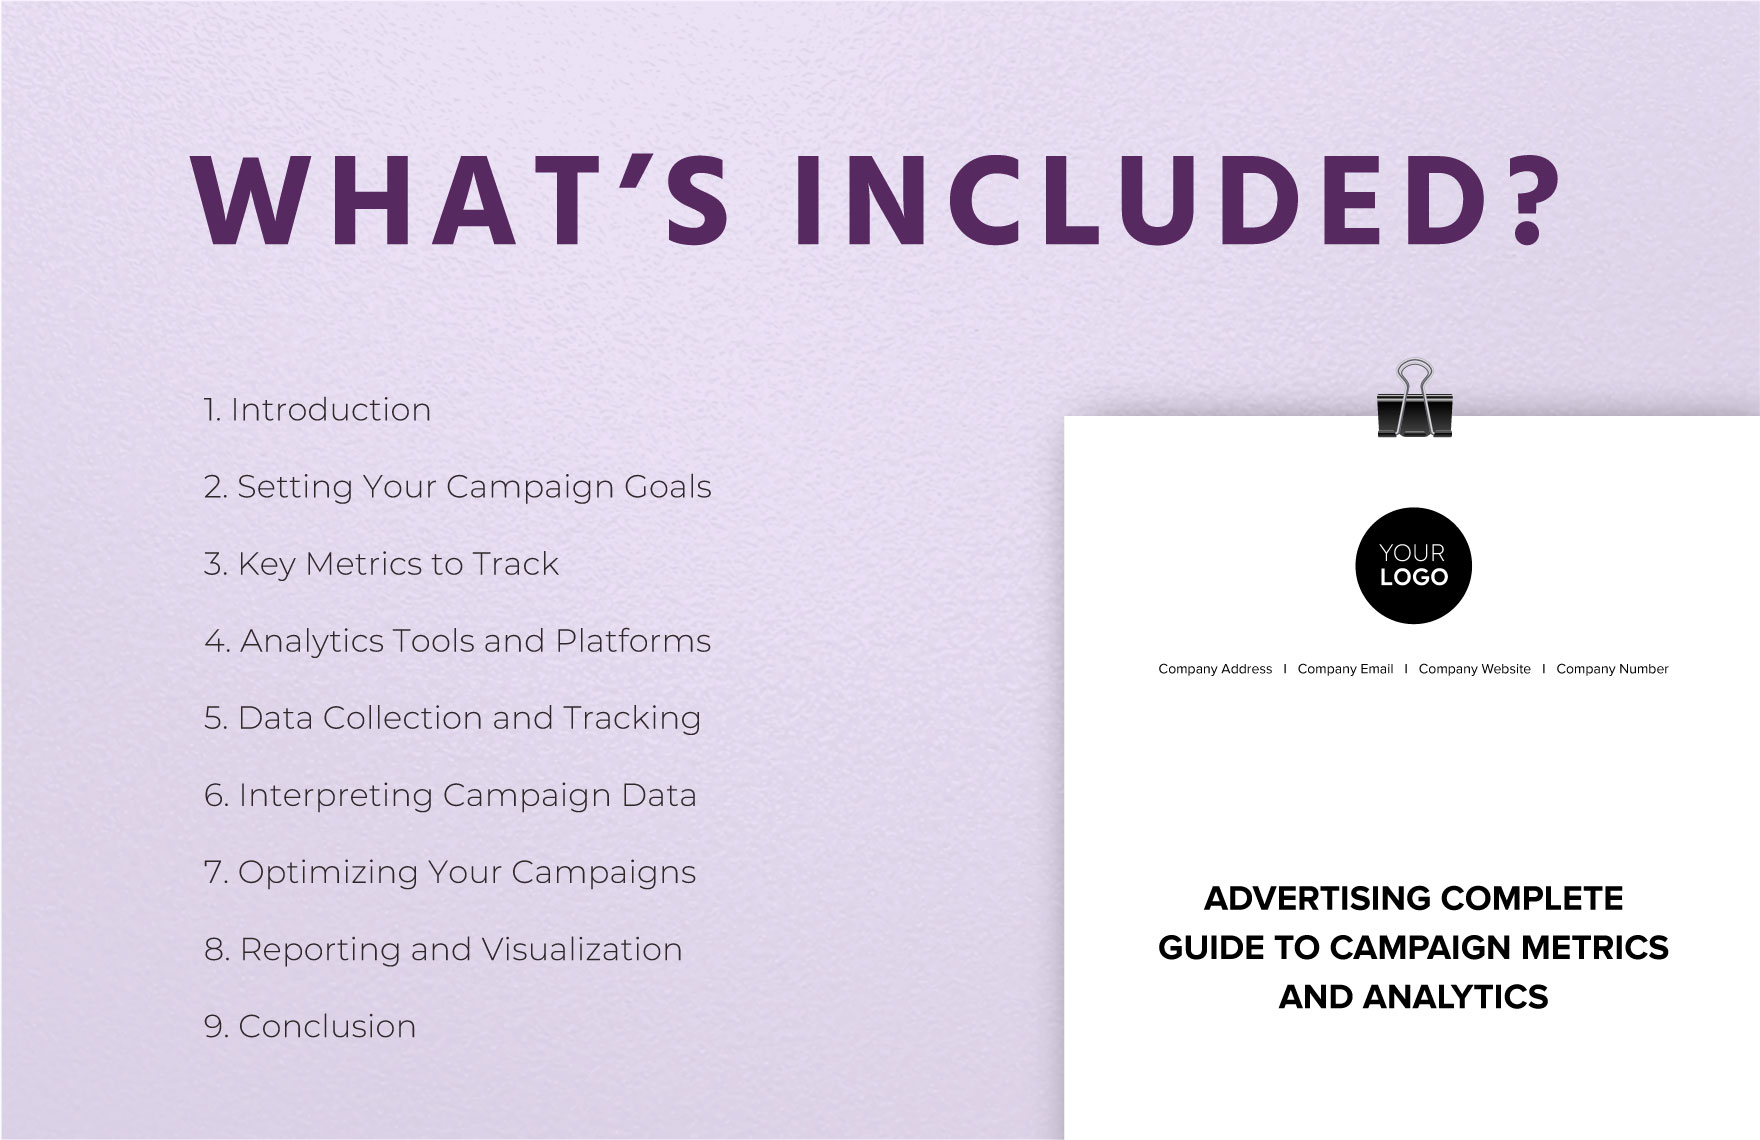 Advertising Complete Guide to Campaign Metrics and Analytics Template